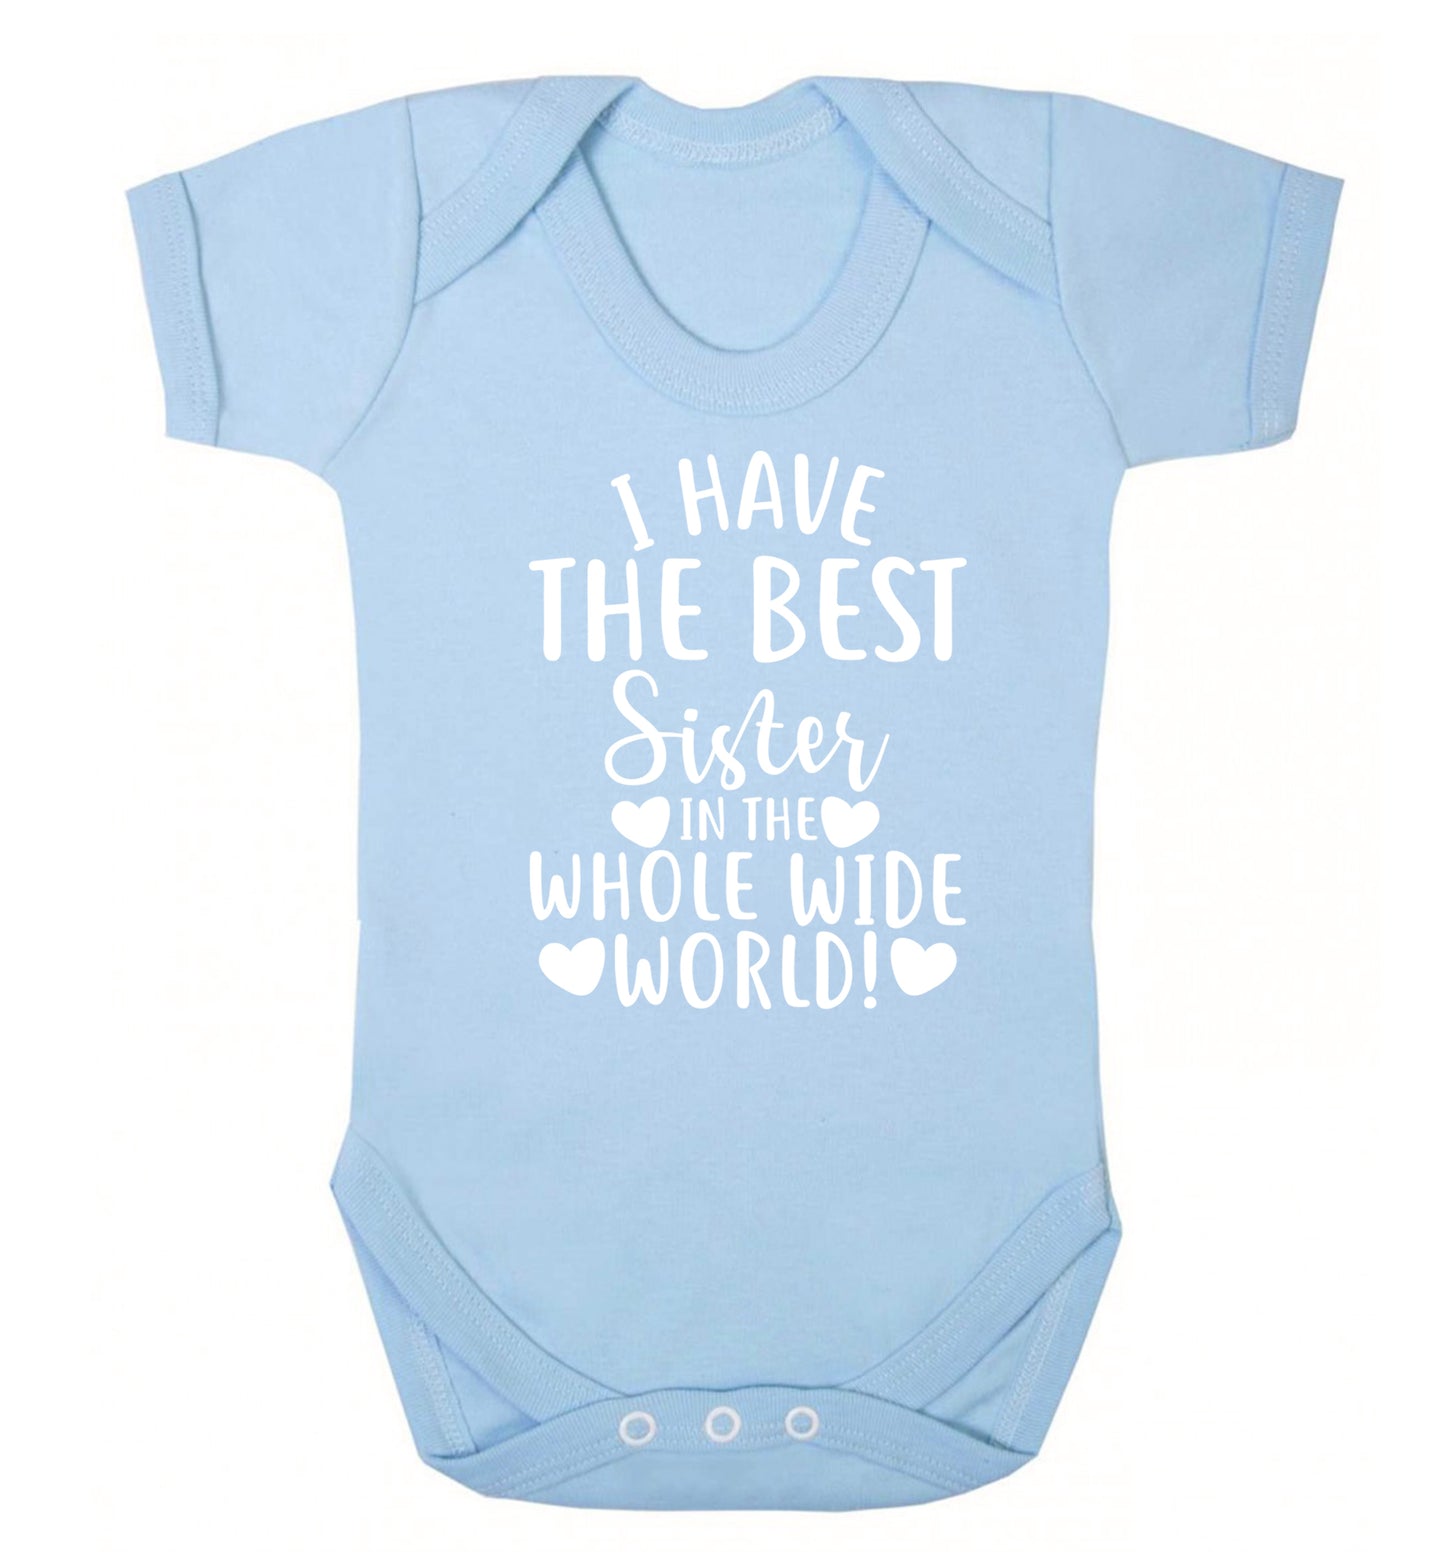 I have the best sister in the whole wide world! Baby Vest pale blue 18-24 months